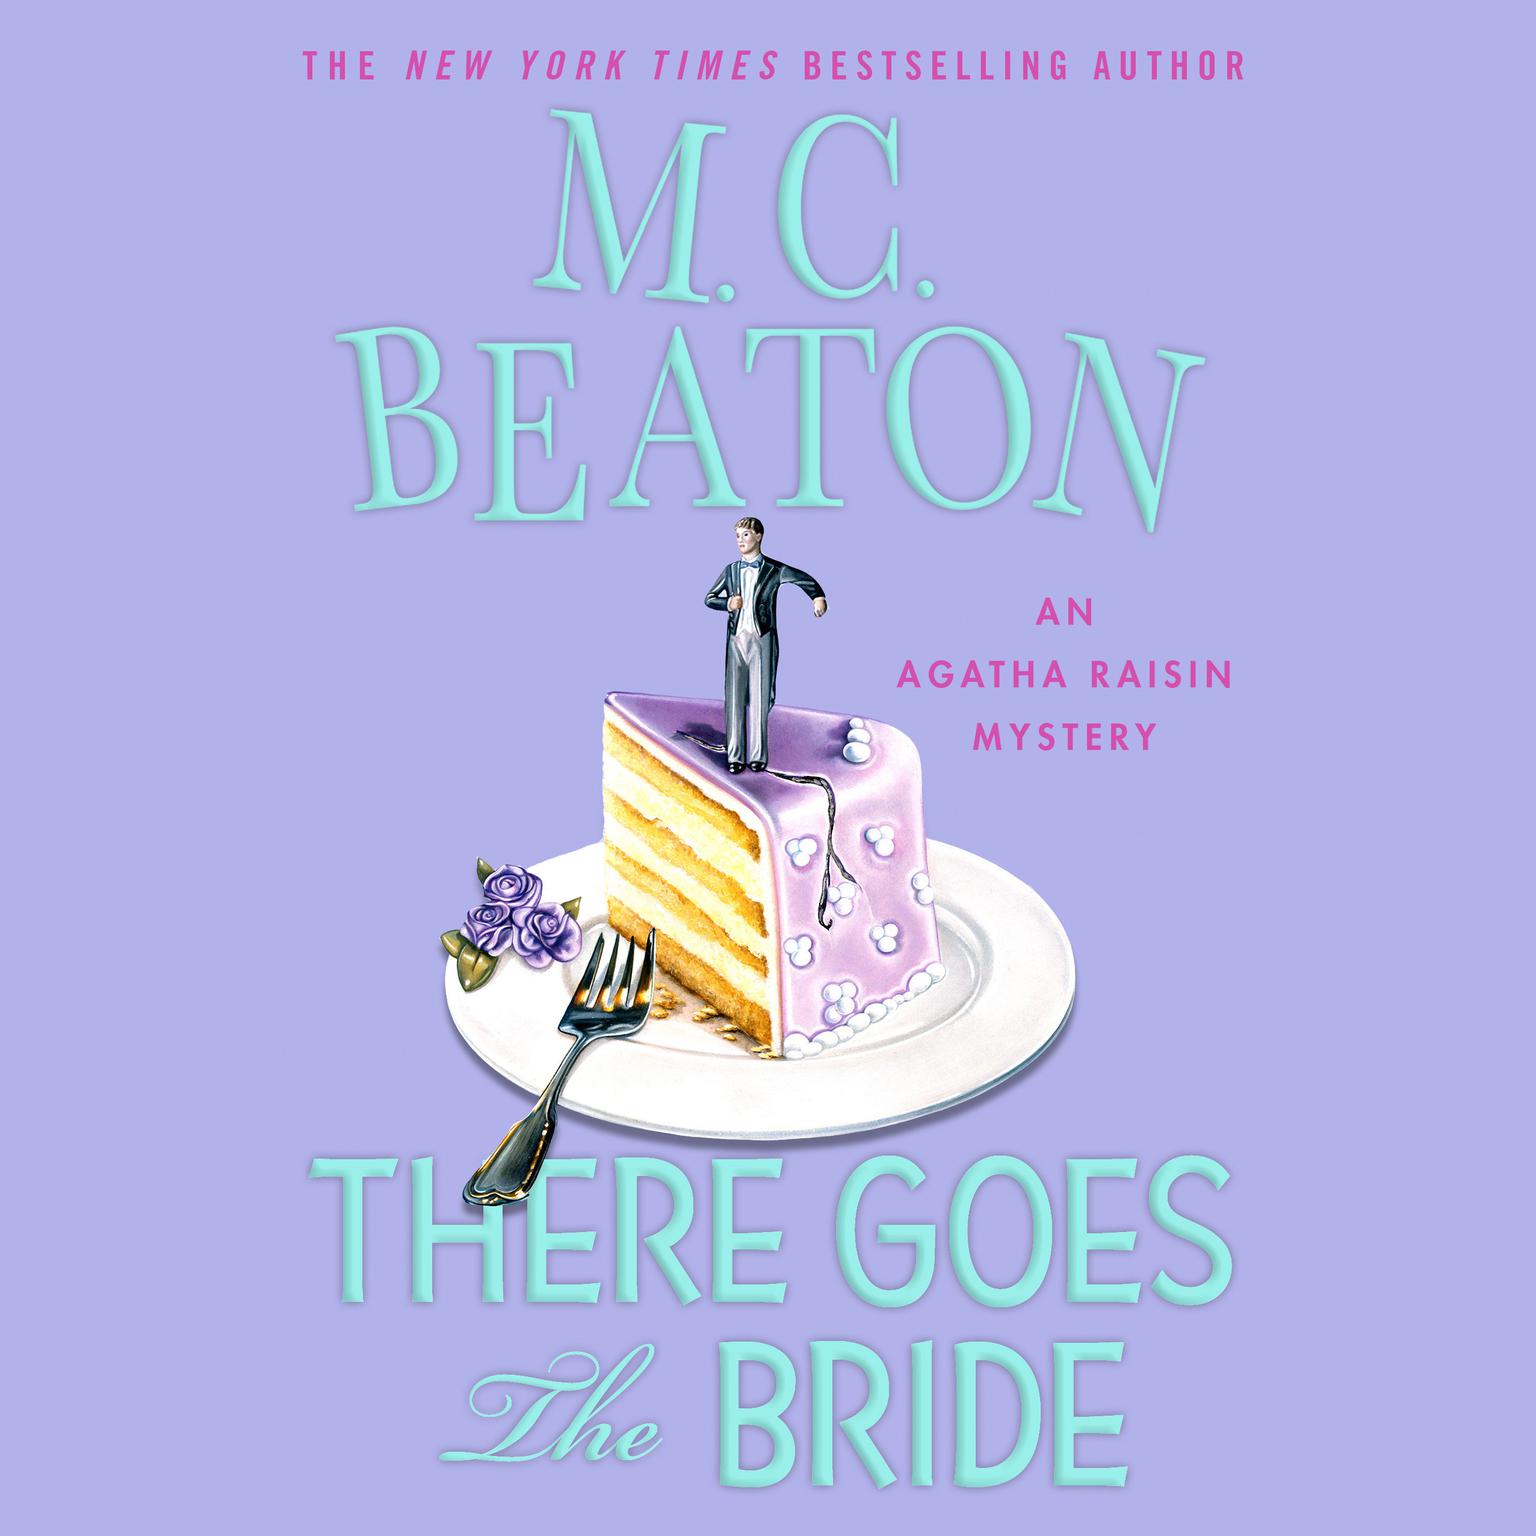 There Goes the Bride: An Agatha Raisin Mystery Audiobook, by M. C. Beaton